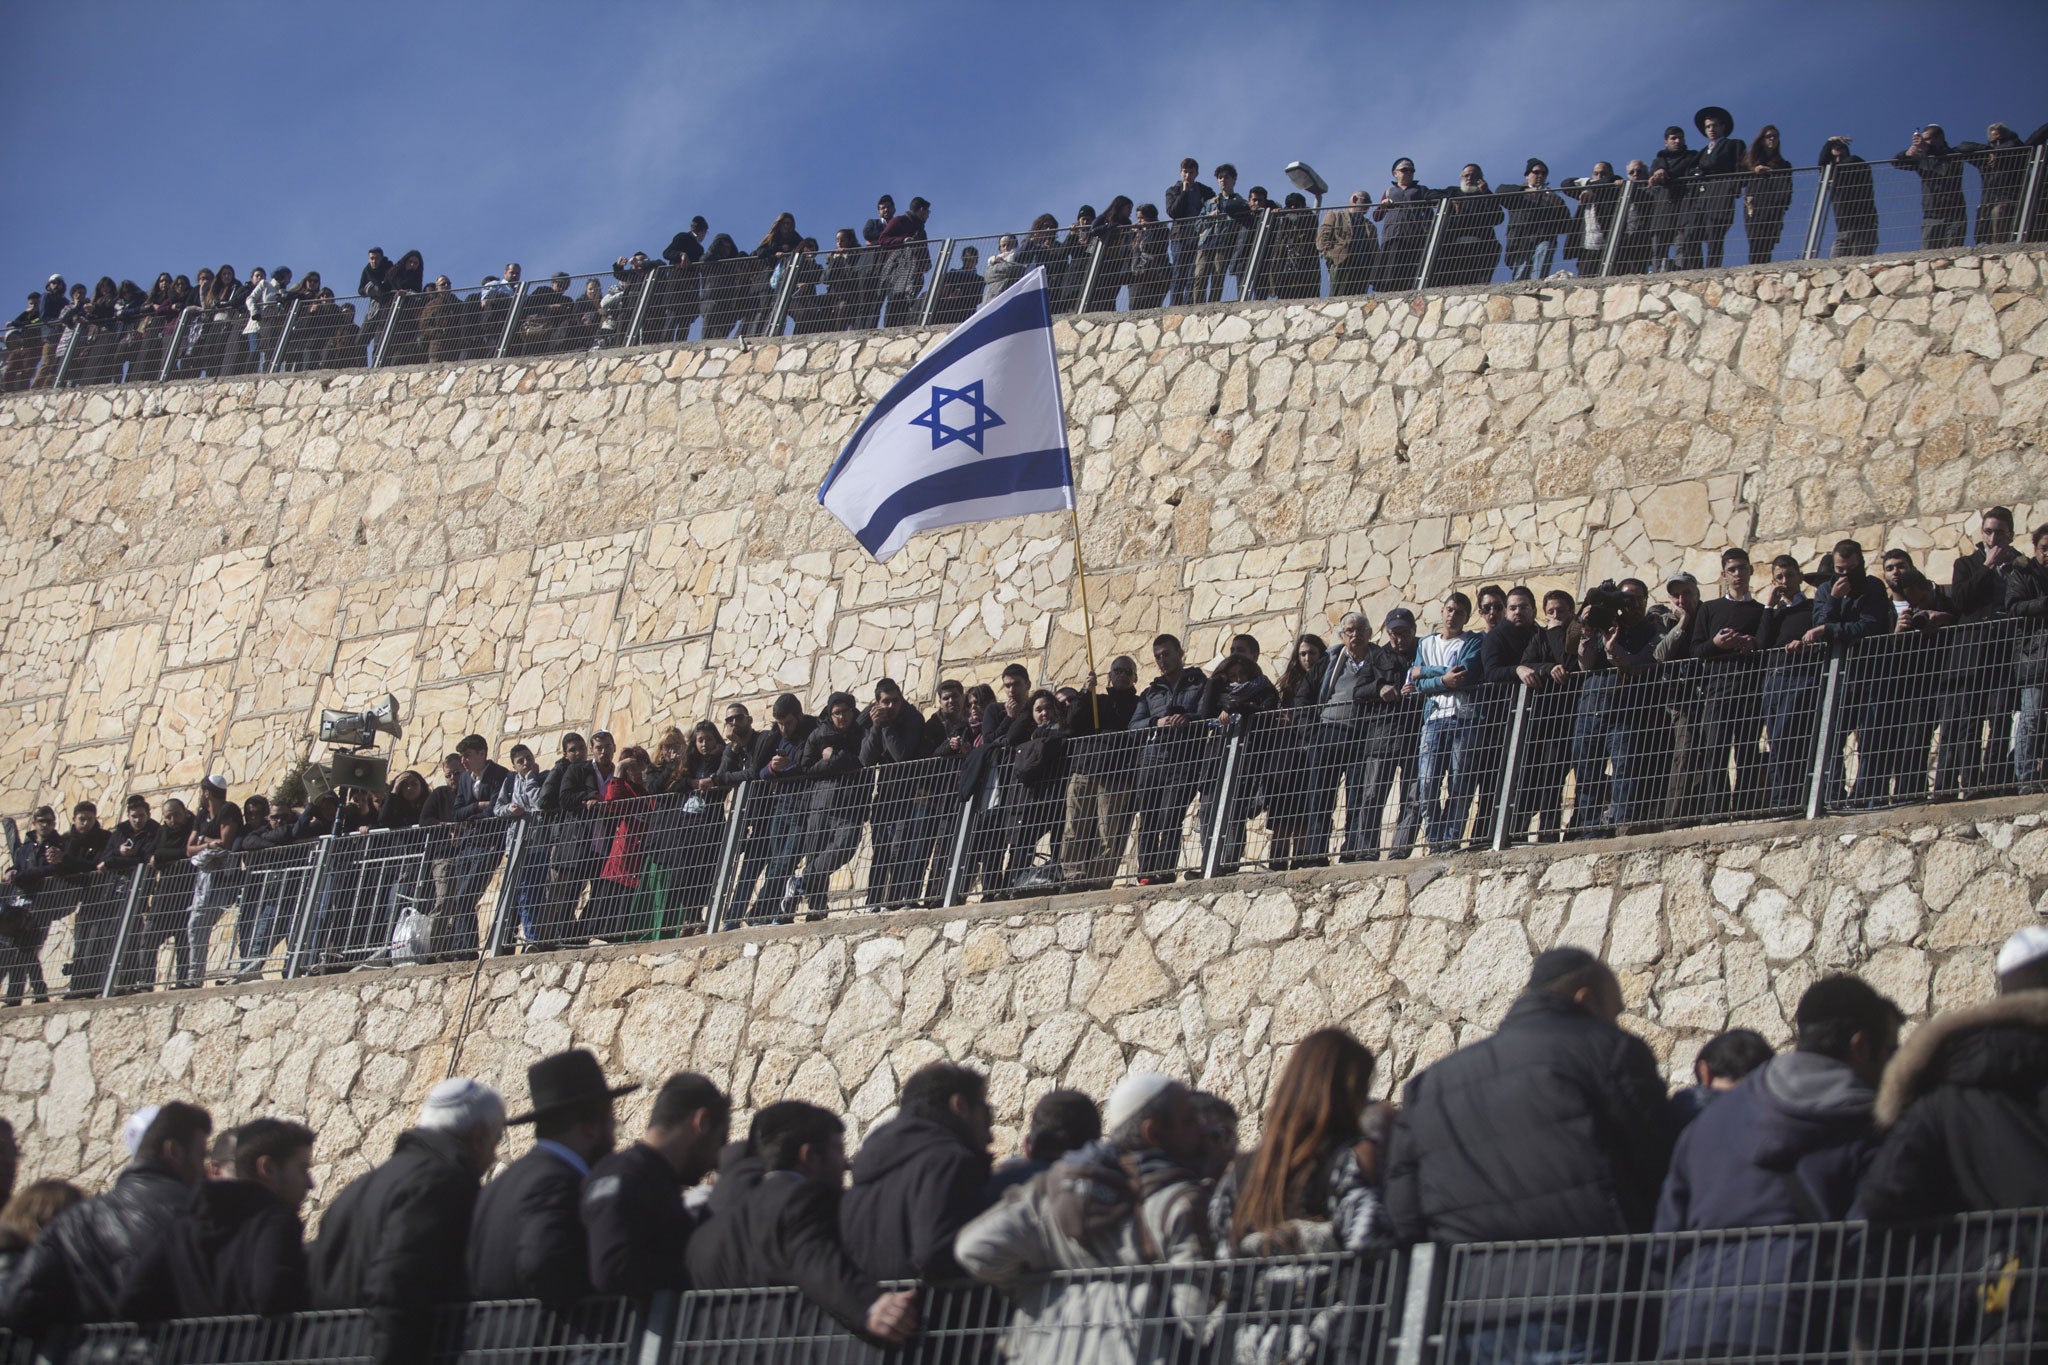 Mourners gather in Israel for the funeral of 4 of the victims of the attack on a Paris kosher grocery store